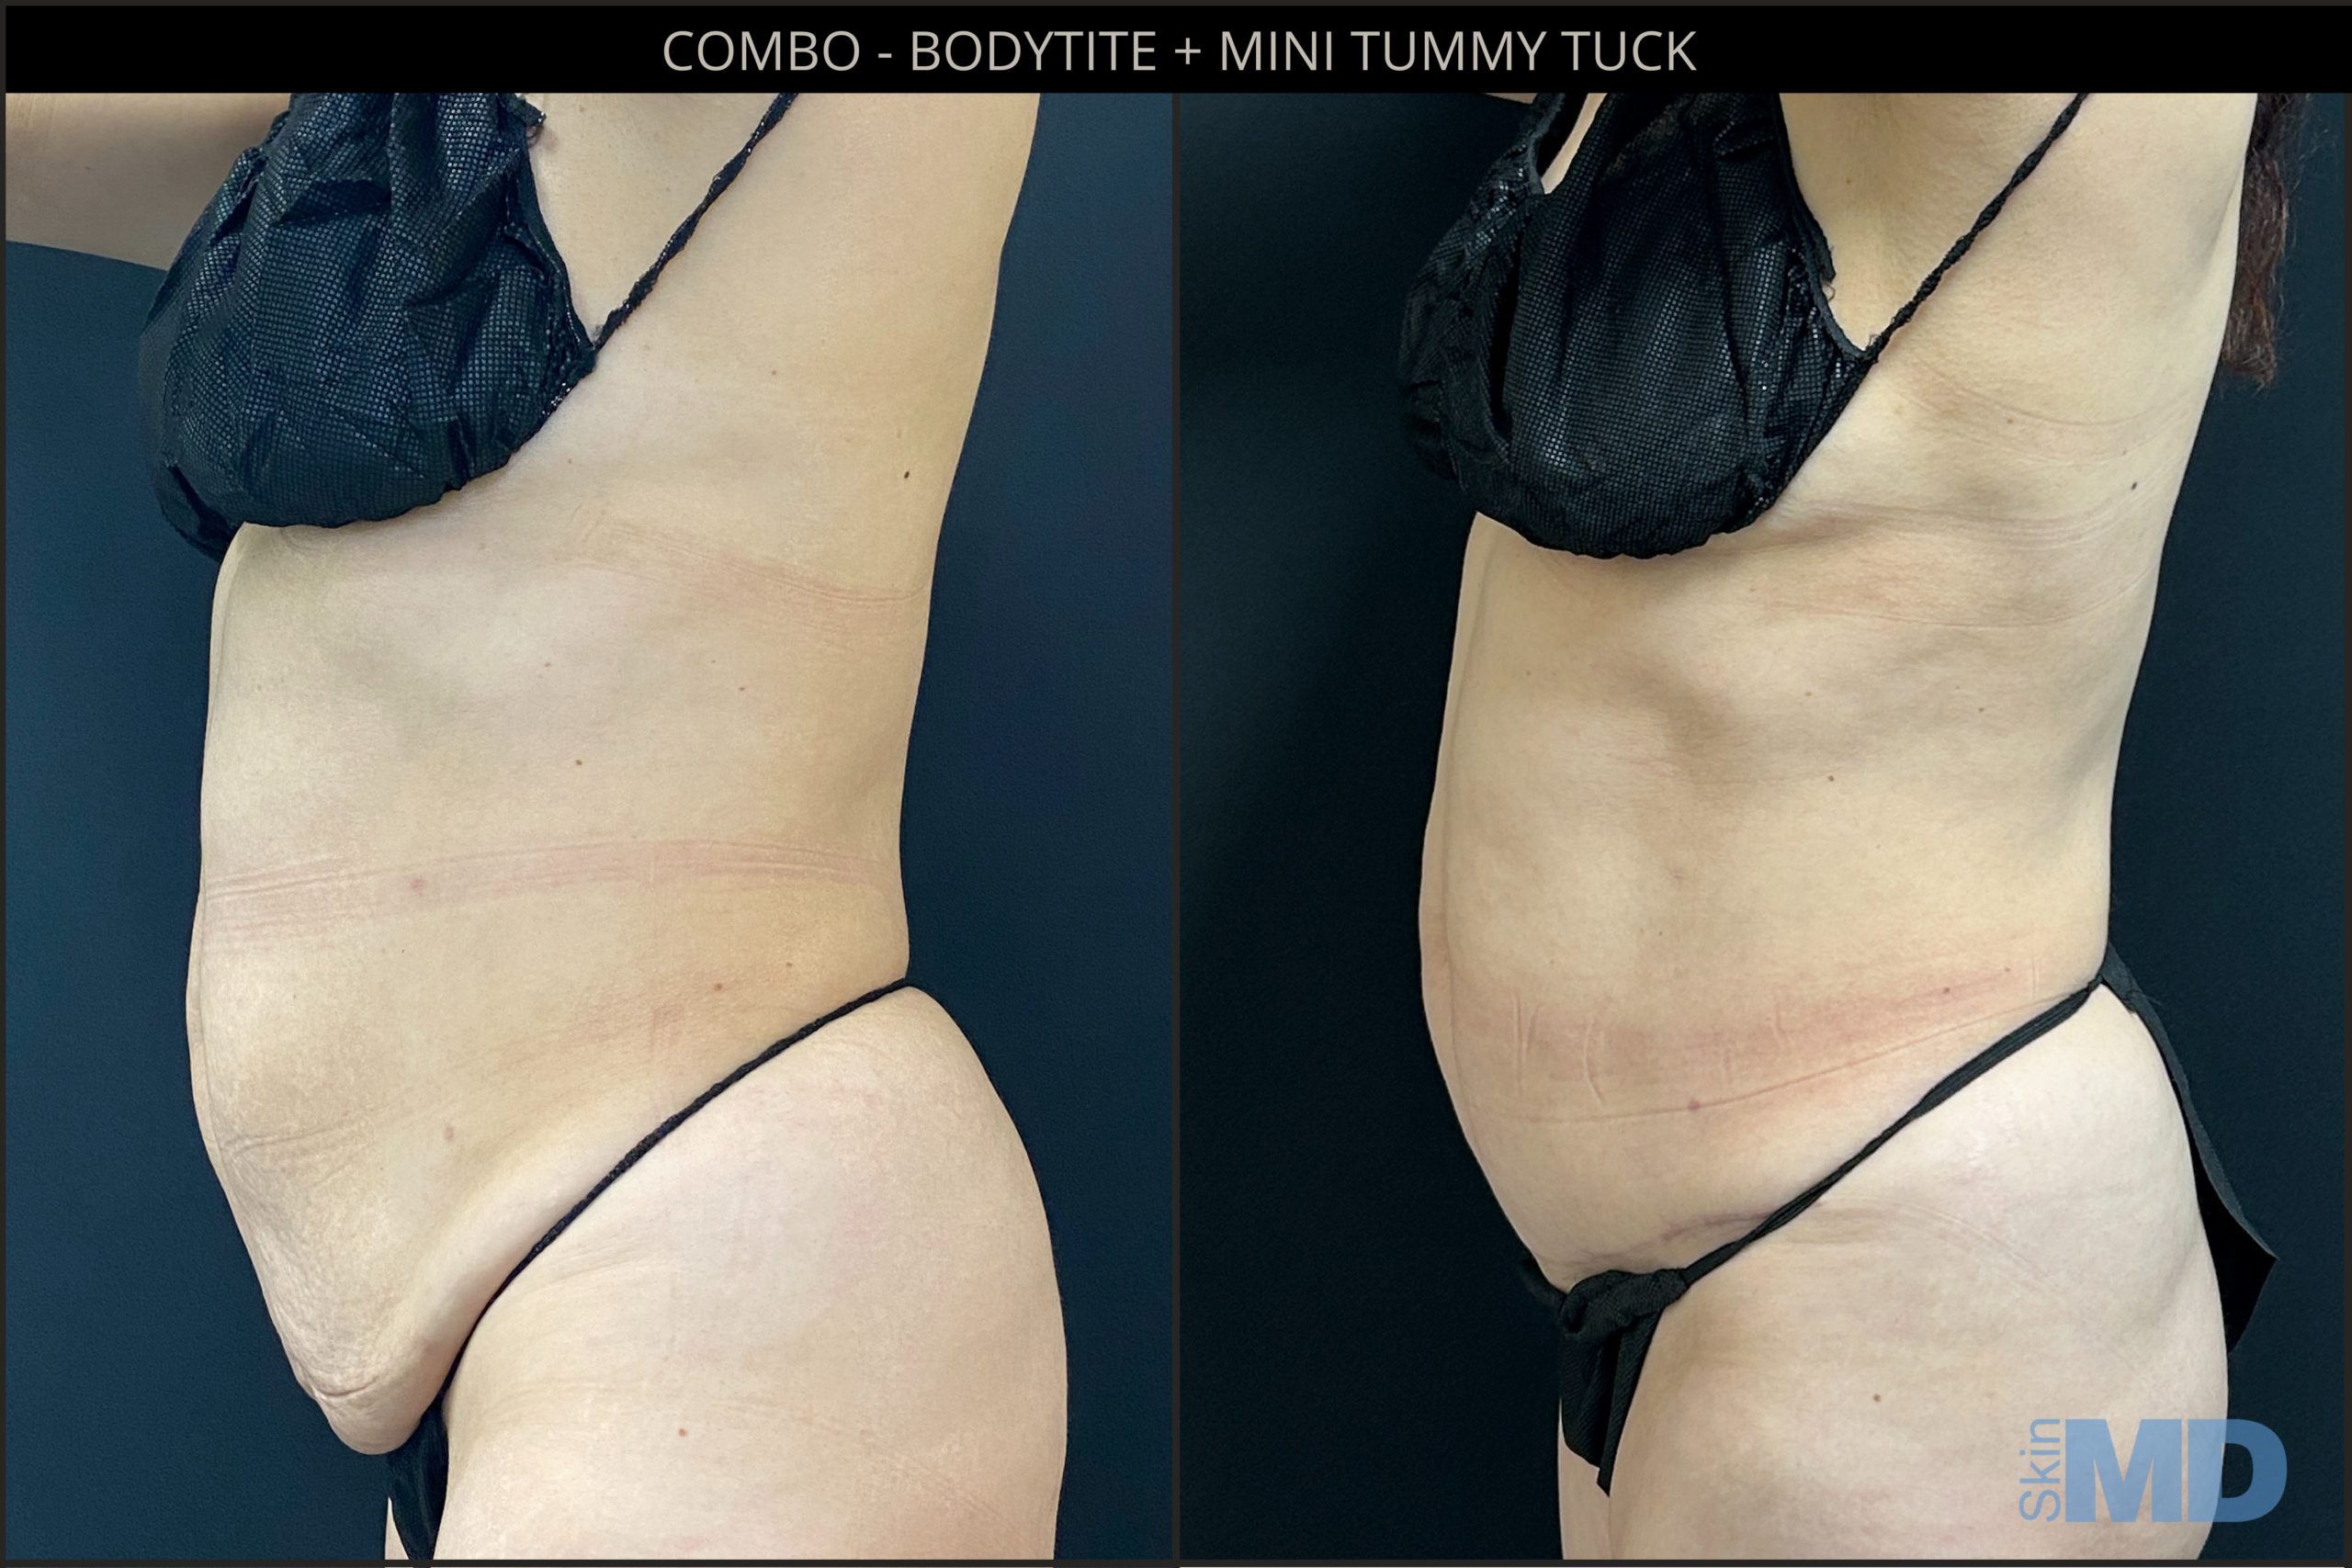 Before and after combo Bodytite and tummy tuck treatments